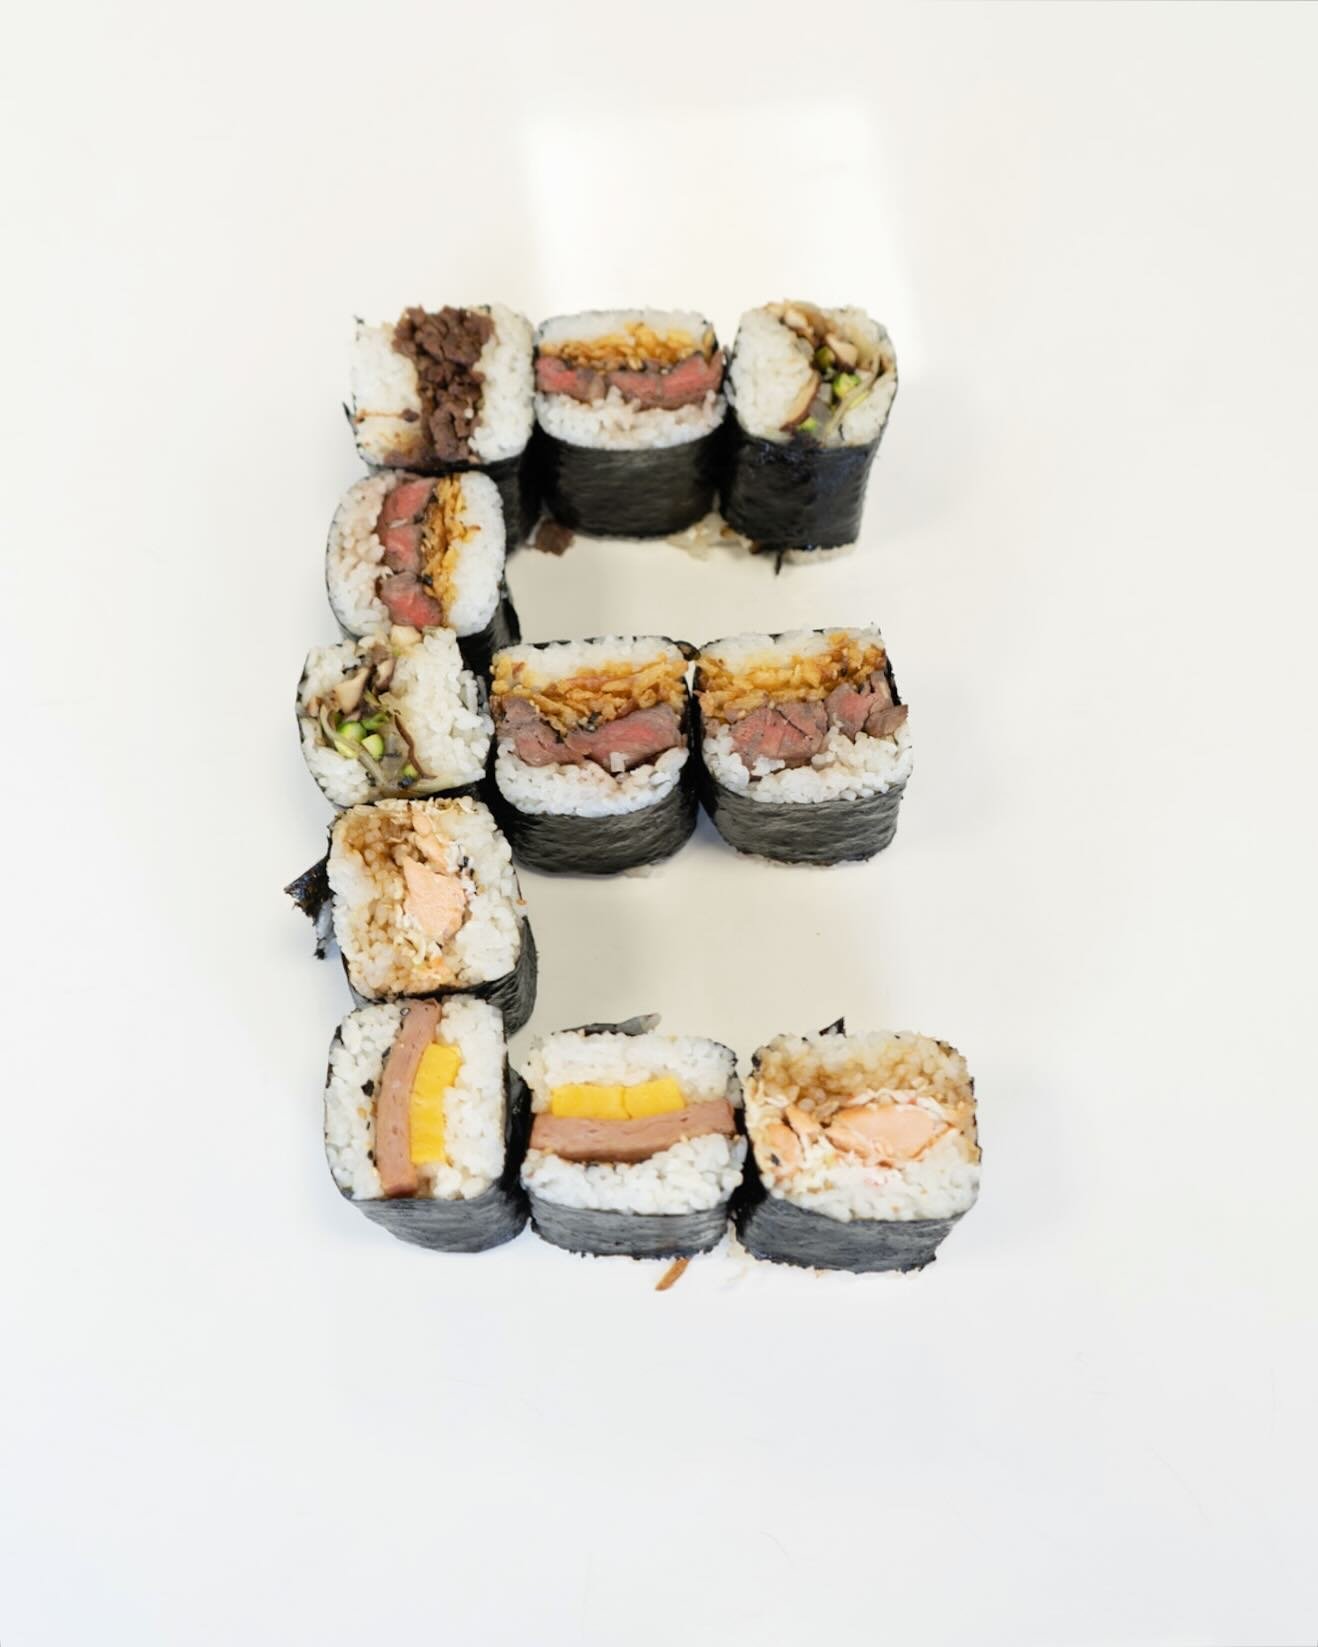 The person who&rsquo;s name starts with an E owes you a Musubi lunch 🤣✨

📍2626 W La Palma Ave, Anaheim, CA
⏰ 10A-8:30P
#musubisquare